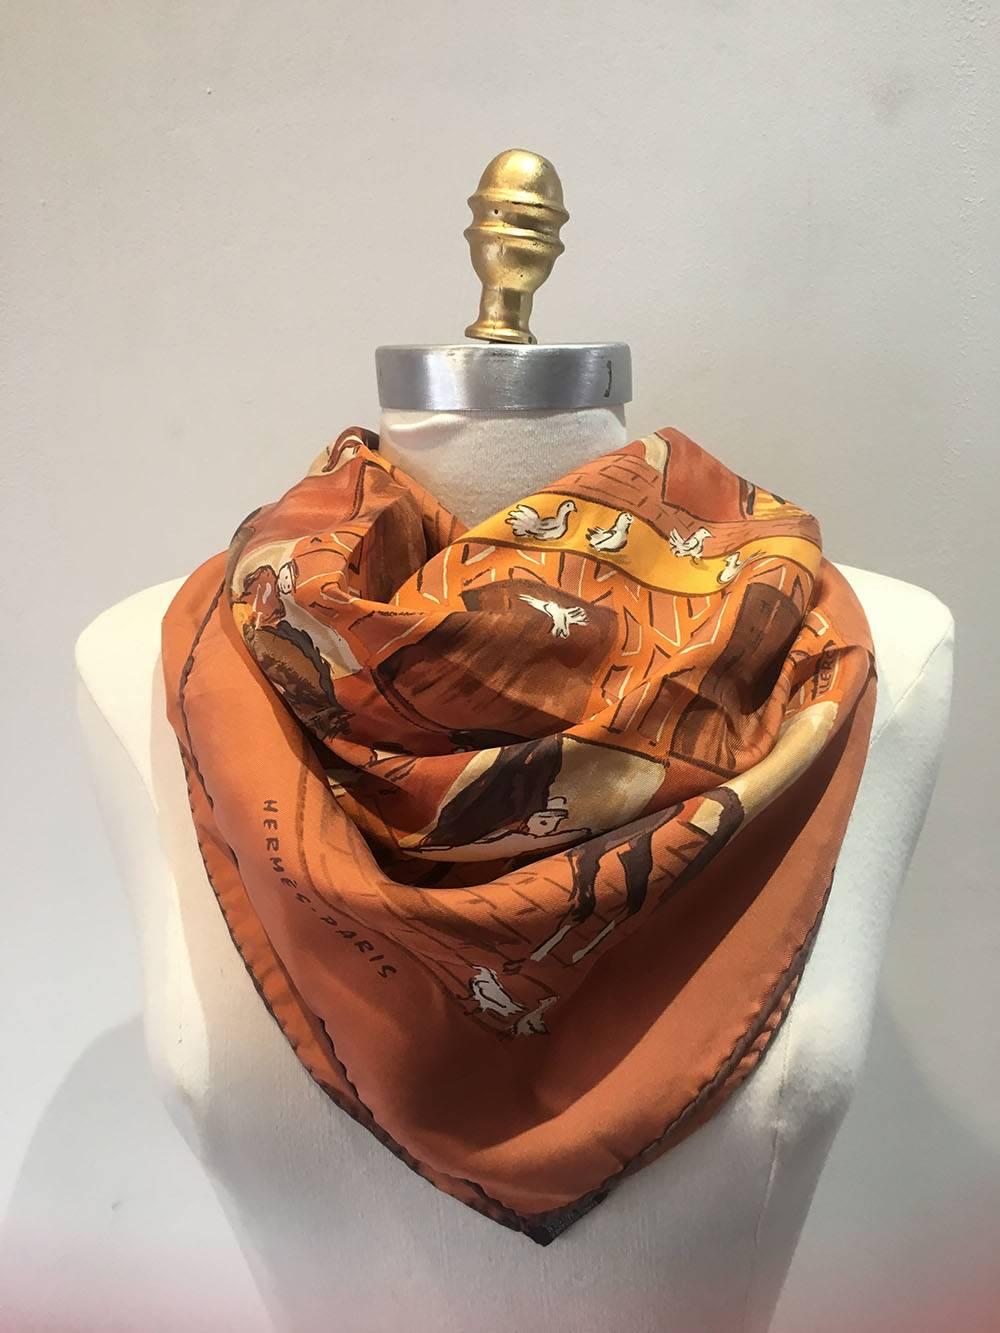 Classic Hermes Les Boxes silk scarf in very good condition.  Original silk screen design c2006 by Jean-Louis Clerc features an array of horses and box stables in rows over a rust colored background.  100% silk, hand rolled hem. Made in France. Tag